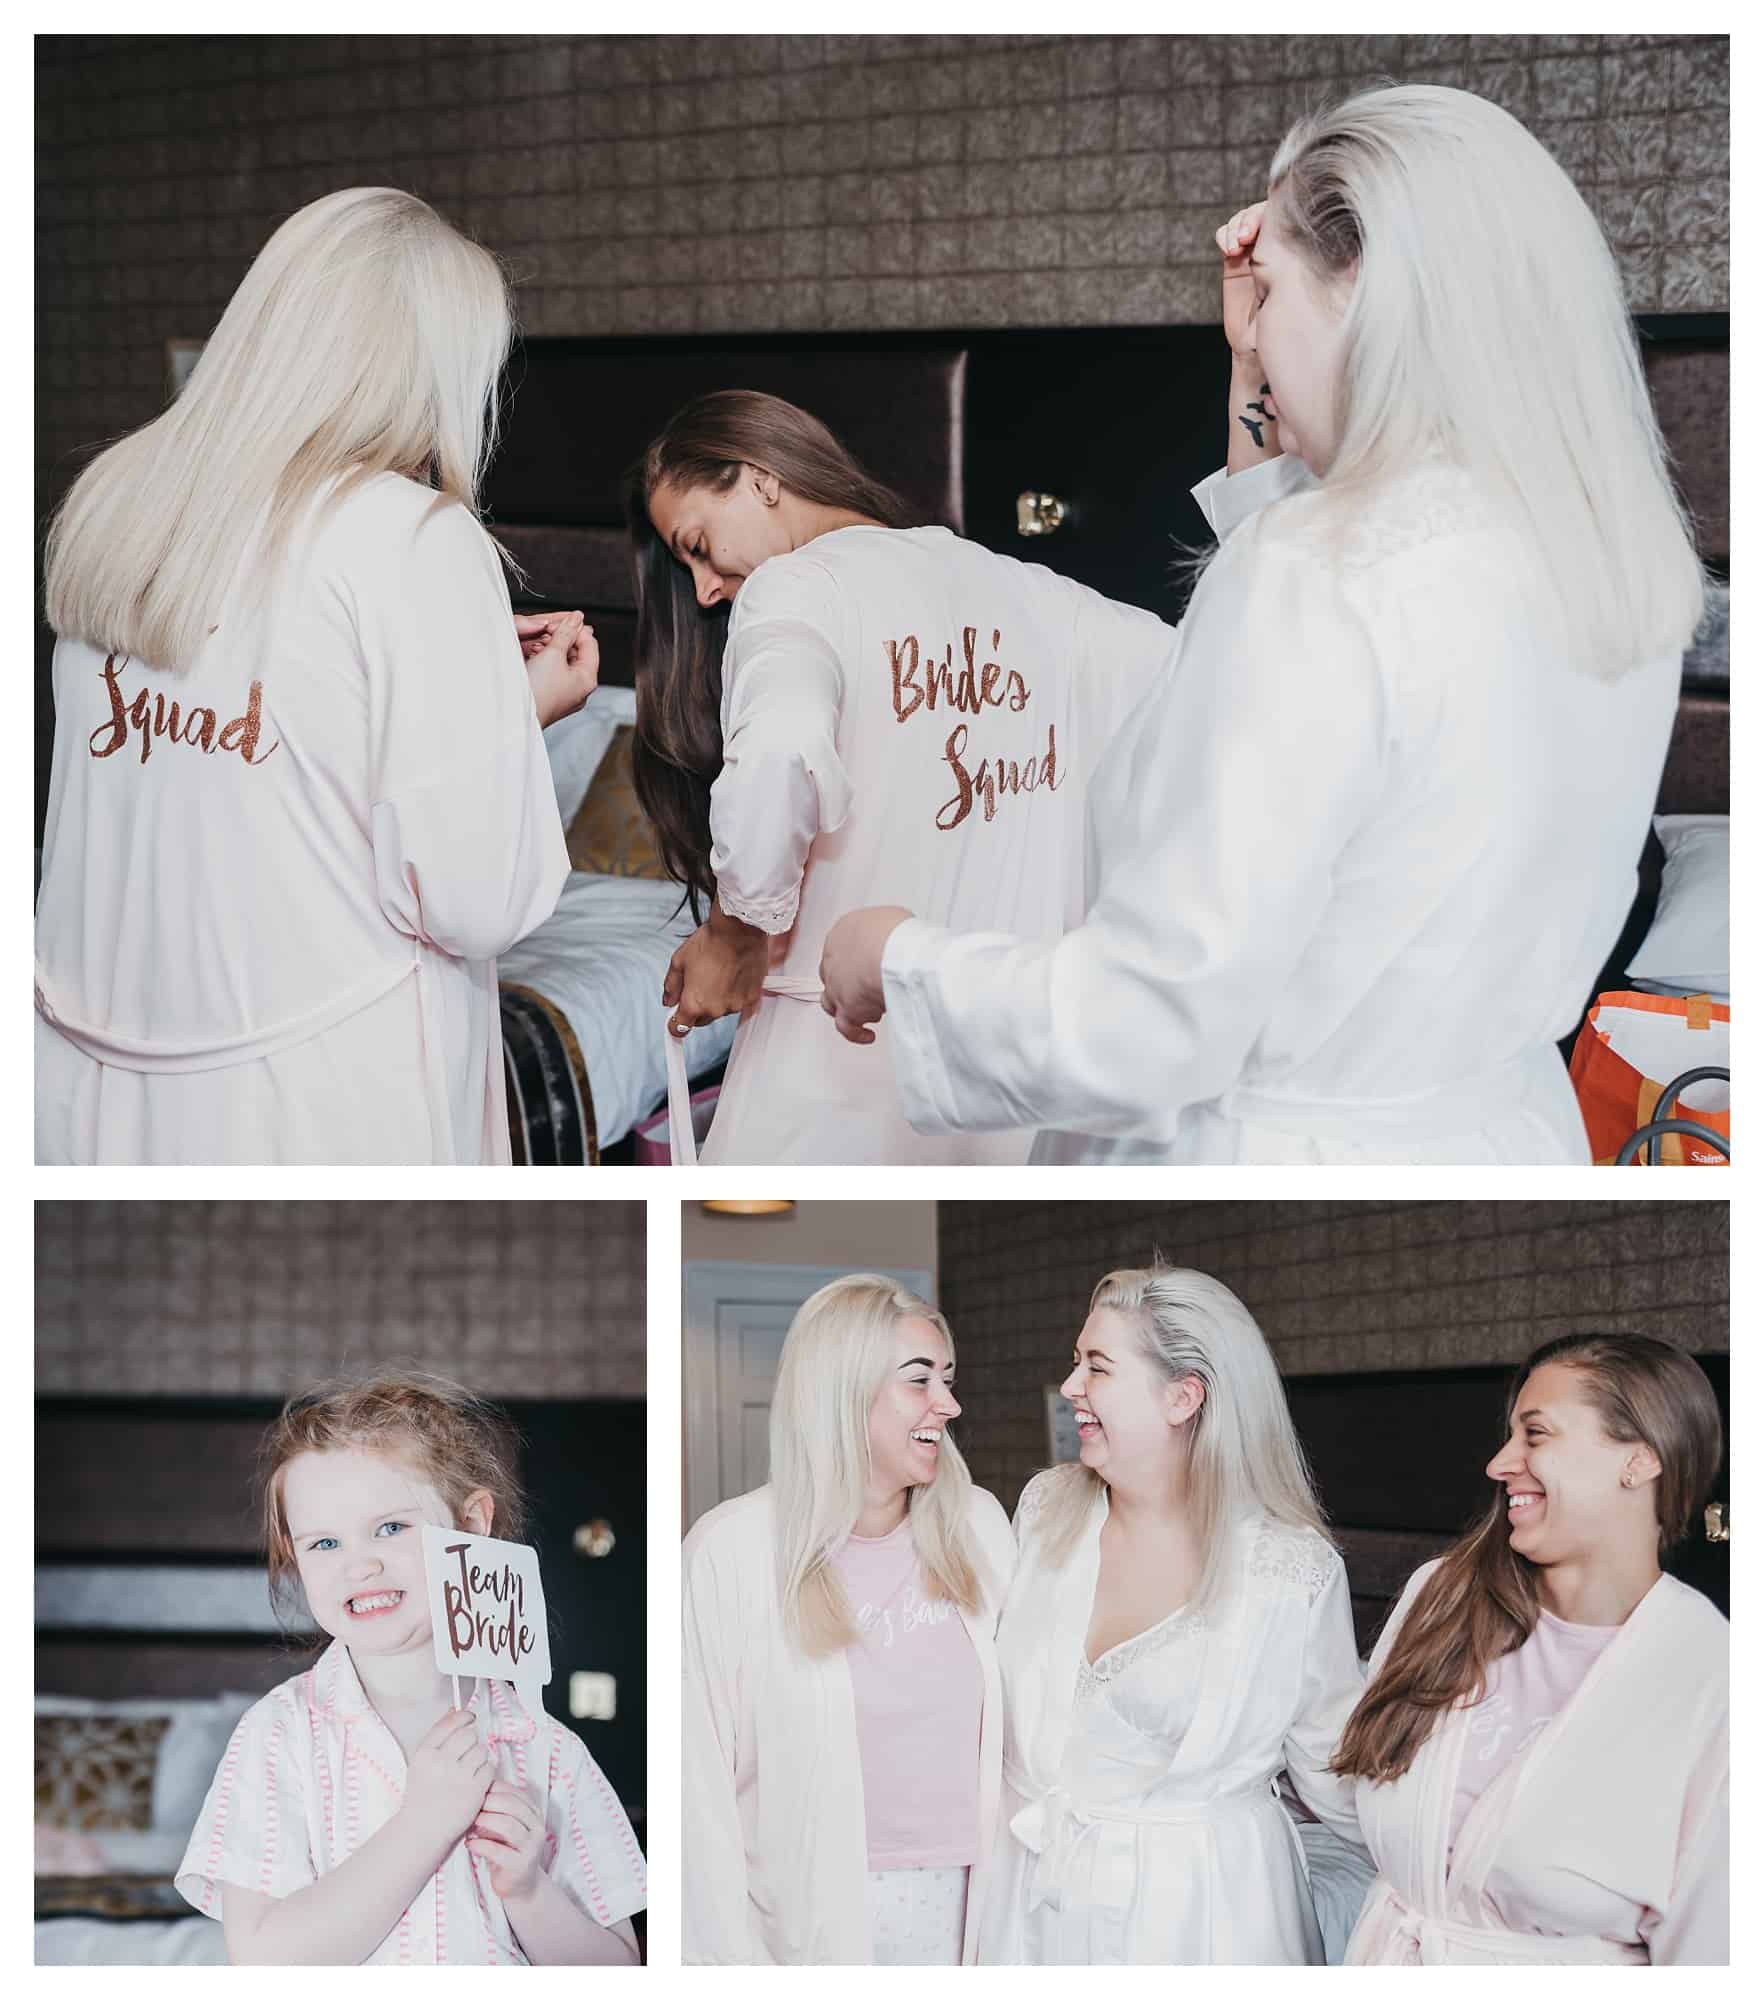 photo of brides maids with dressing gowns on that say brides maid squad, rogerthorpe manor